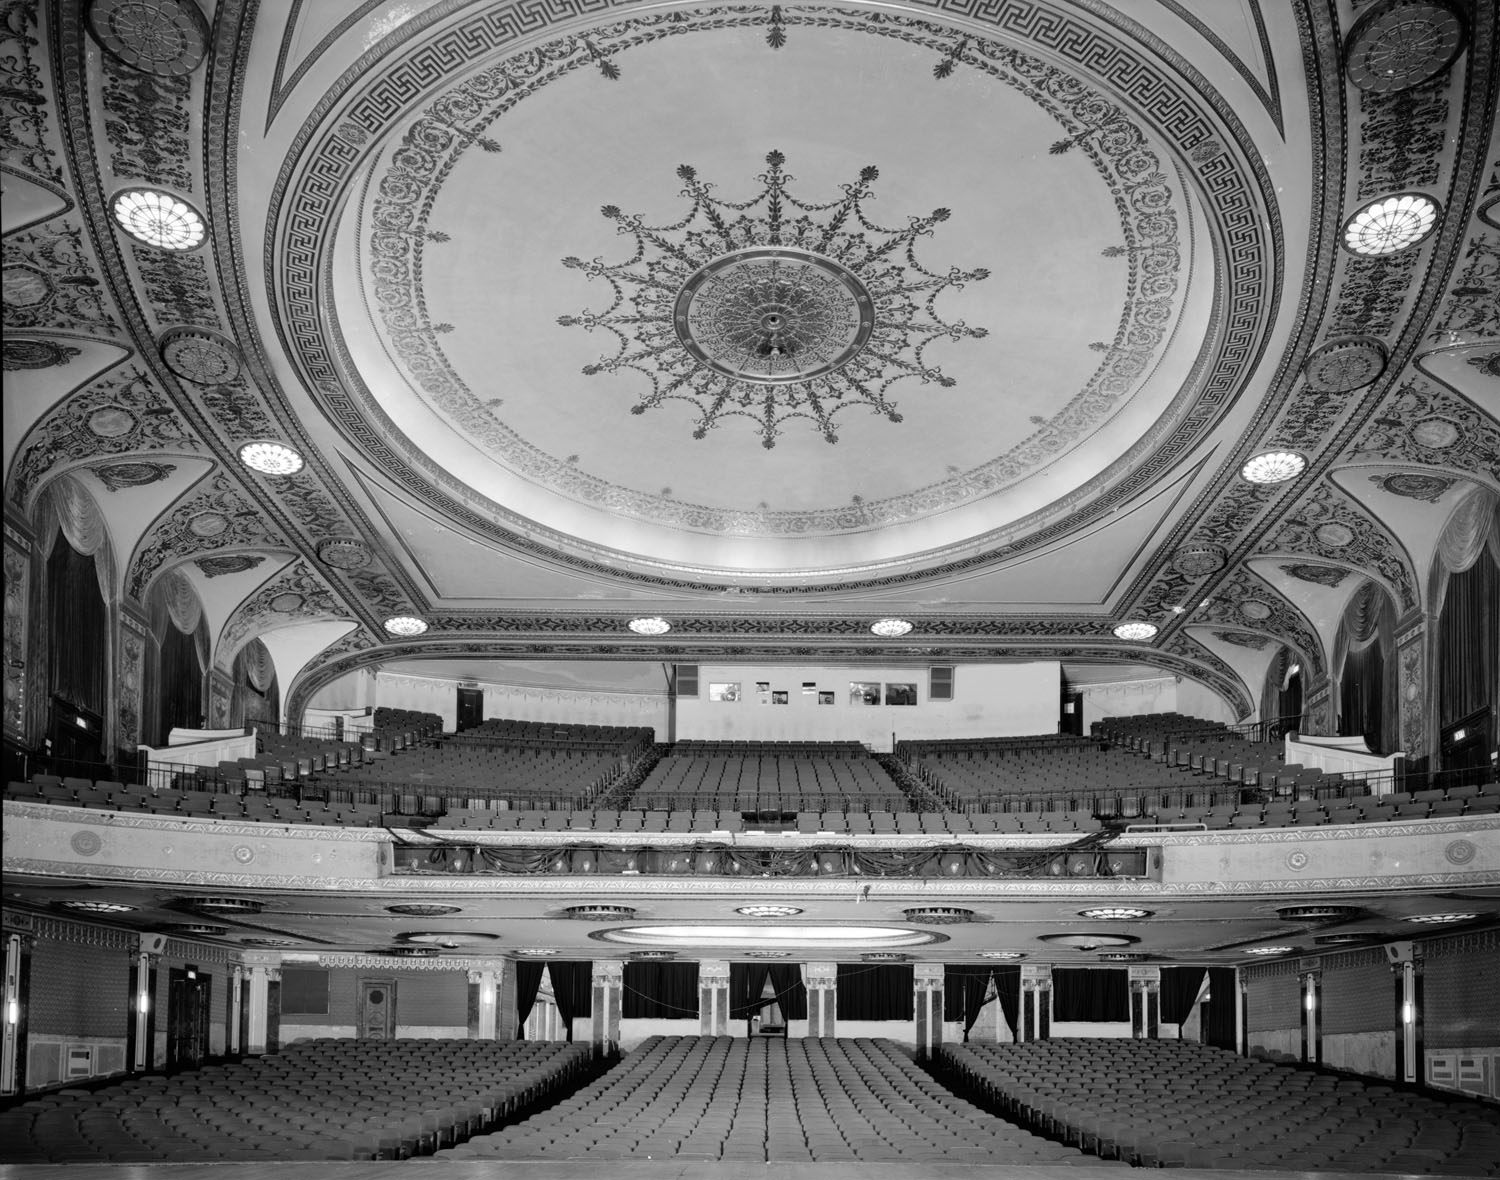 Auditorium from Stage, from the 1990 Historic American Buildings Survey (HABS) held by the Library of Congress – note the missing central chandelier, courtesy Library of Congress (JPG)